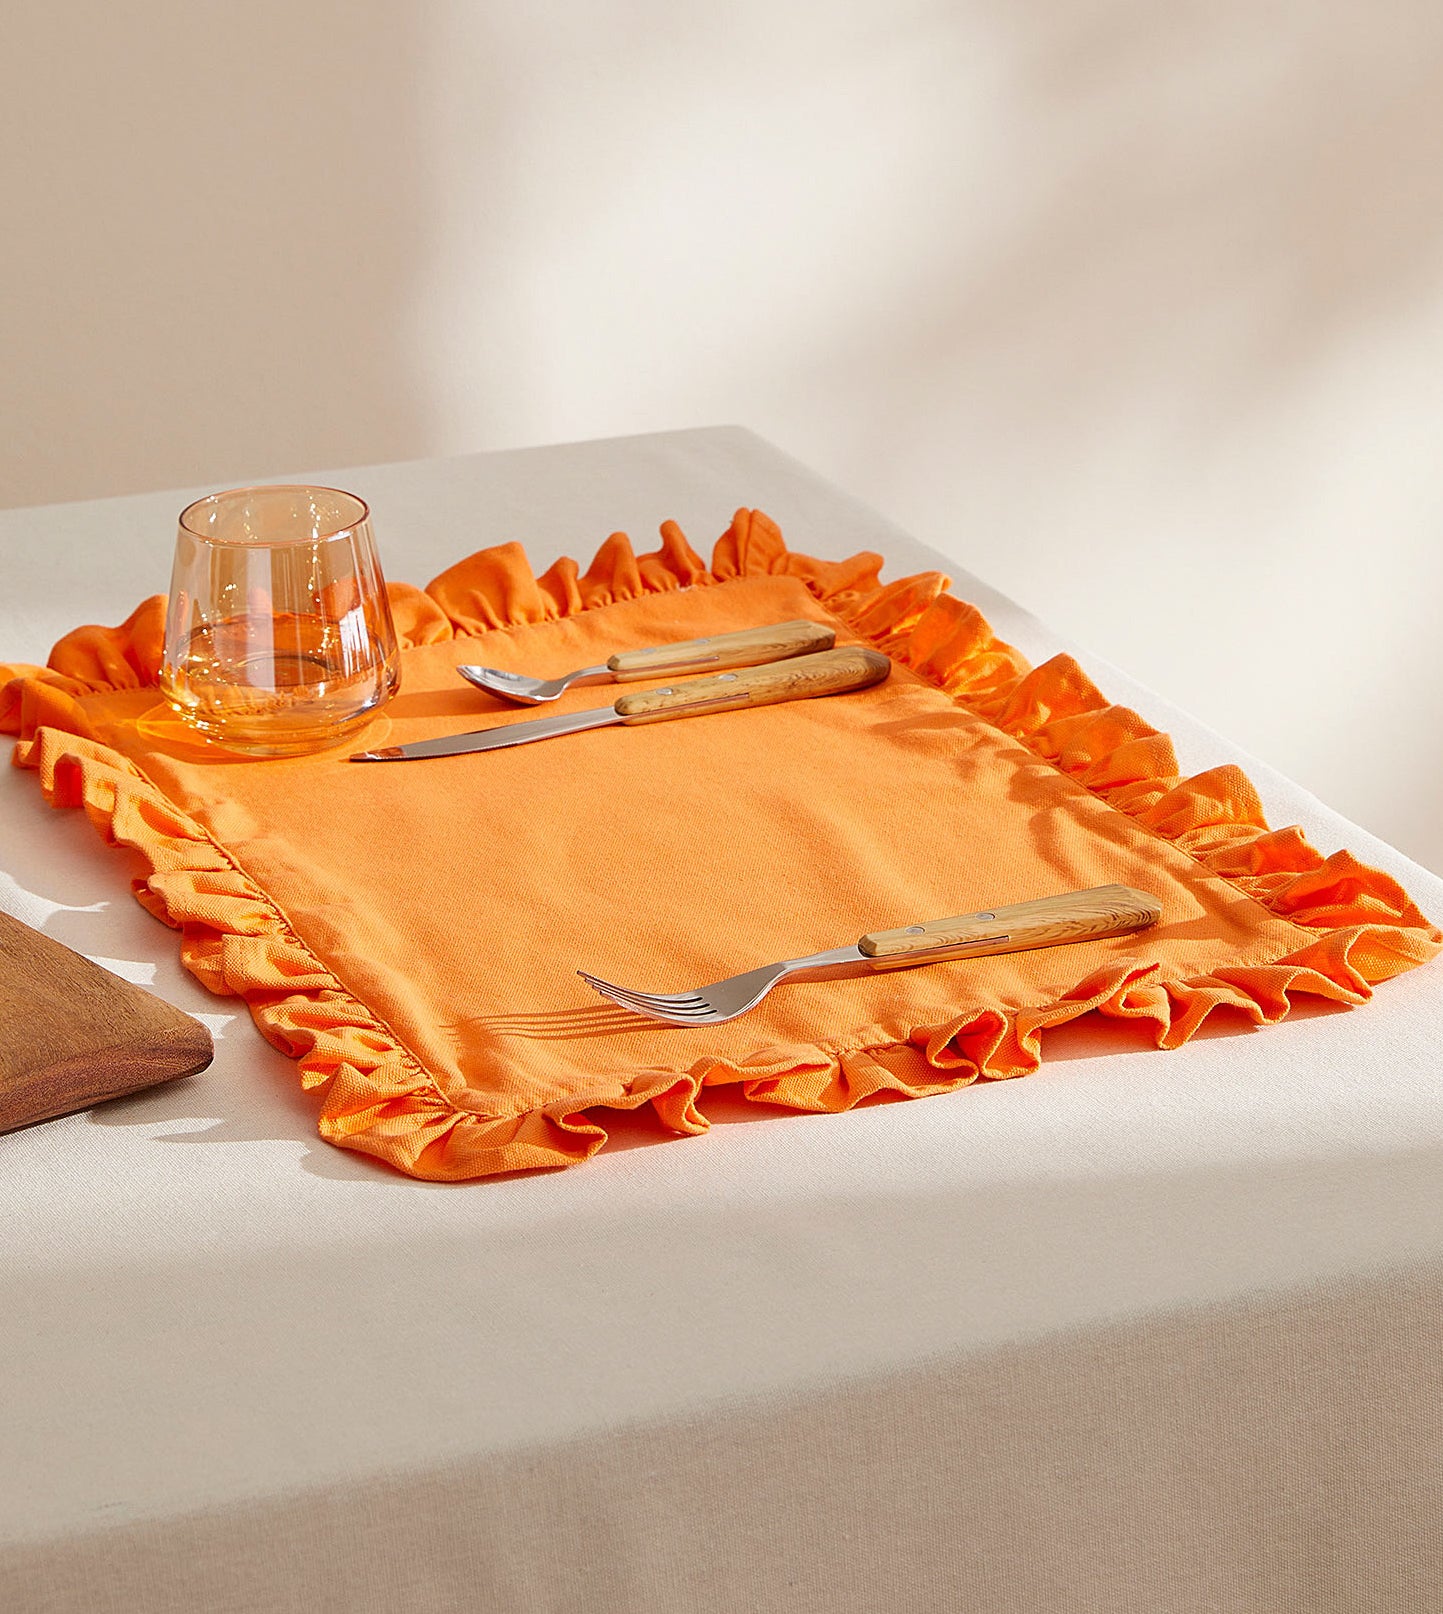 The placemat on a table with silverware on it